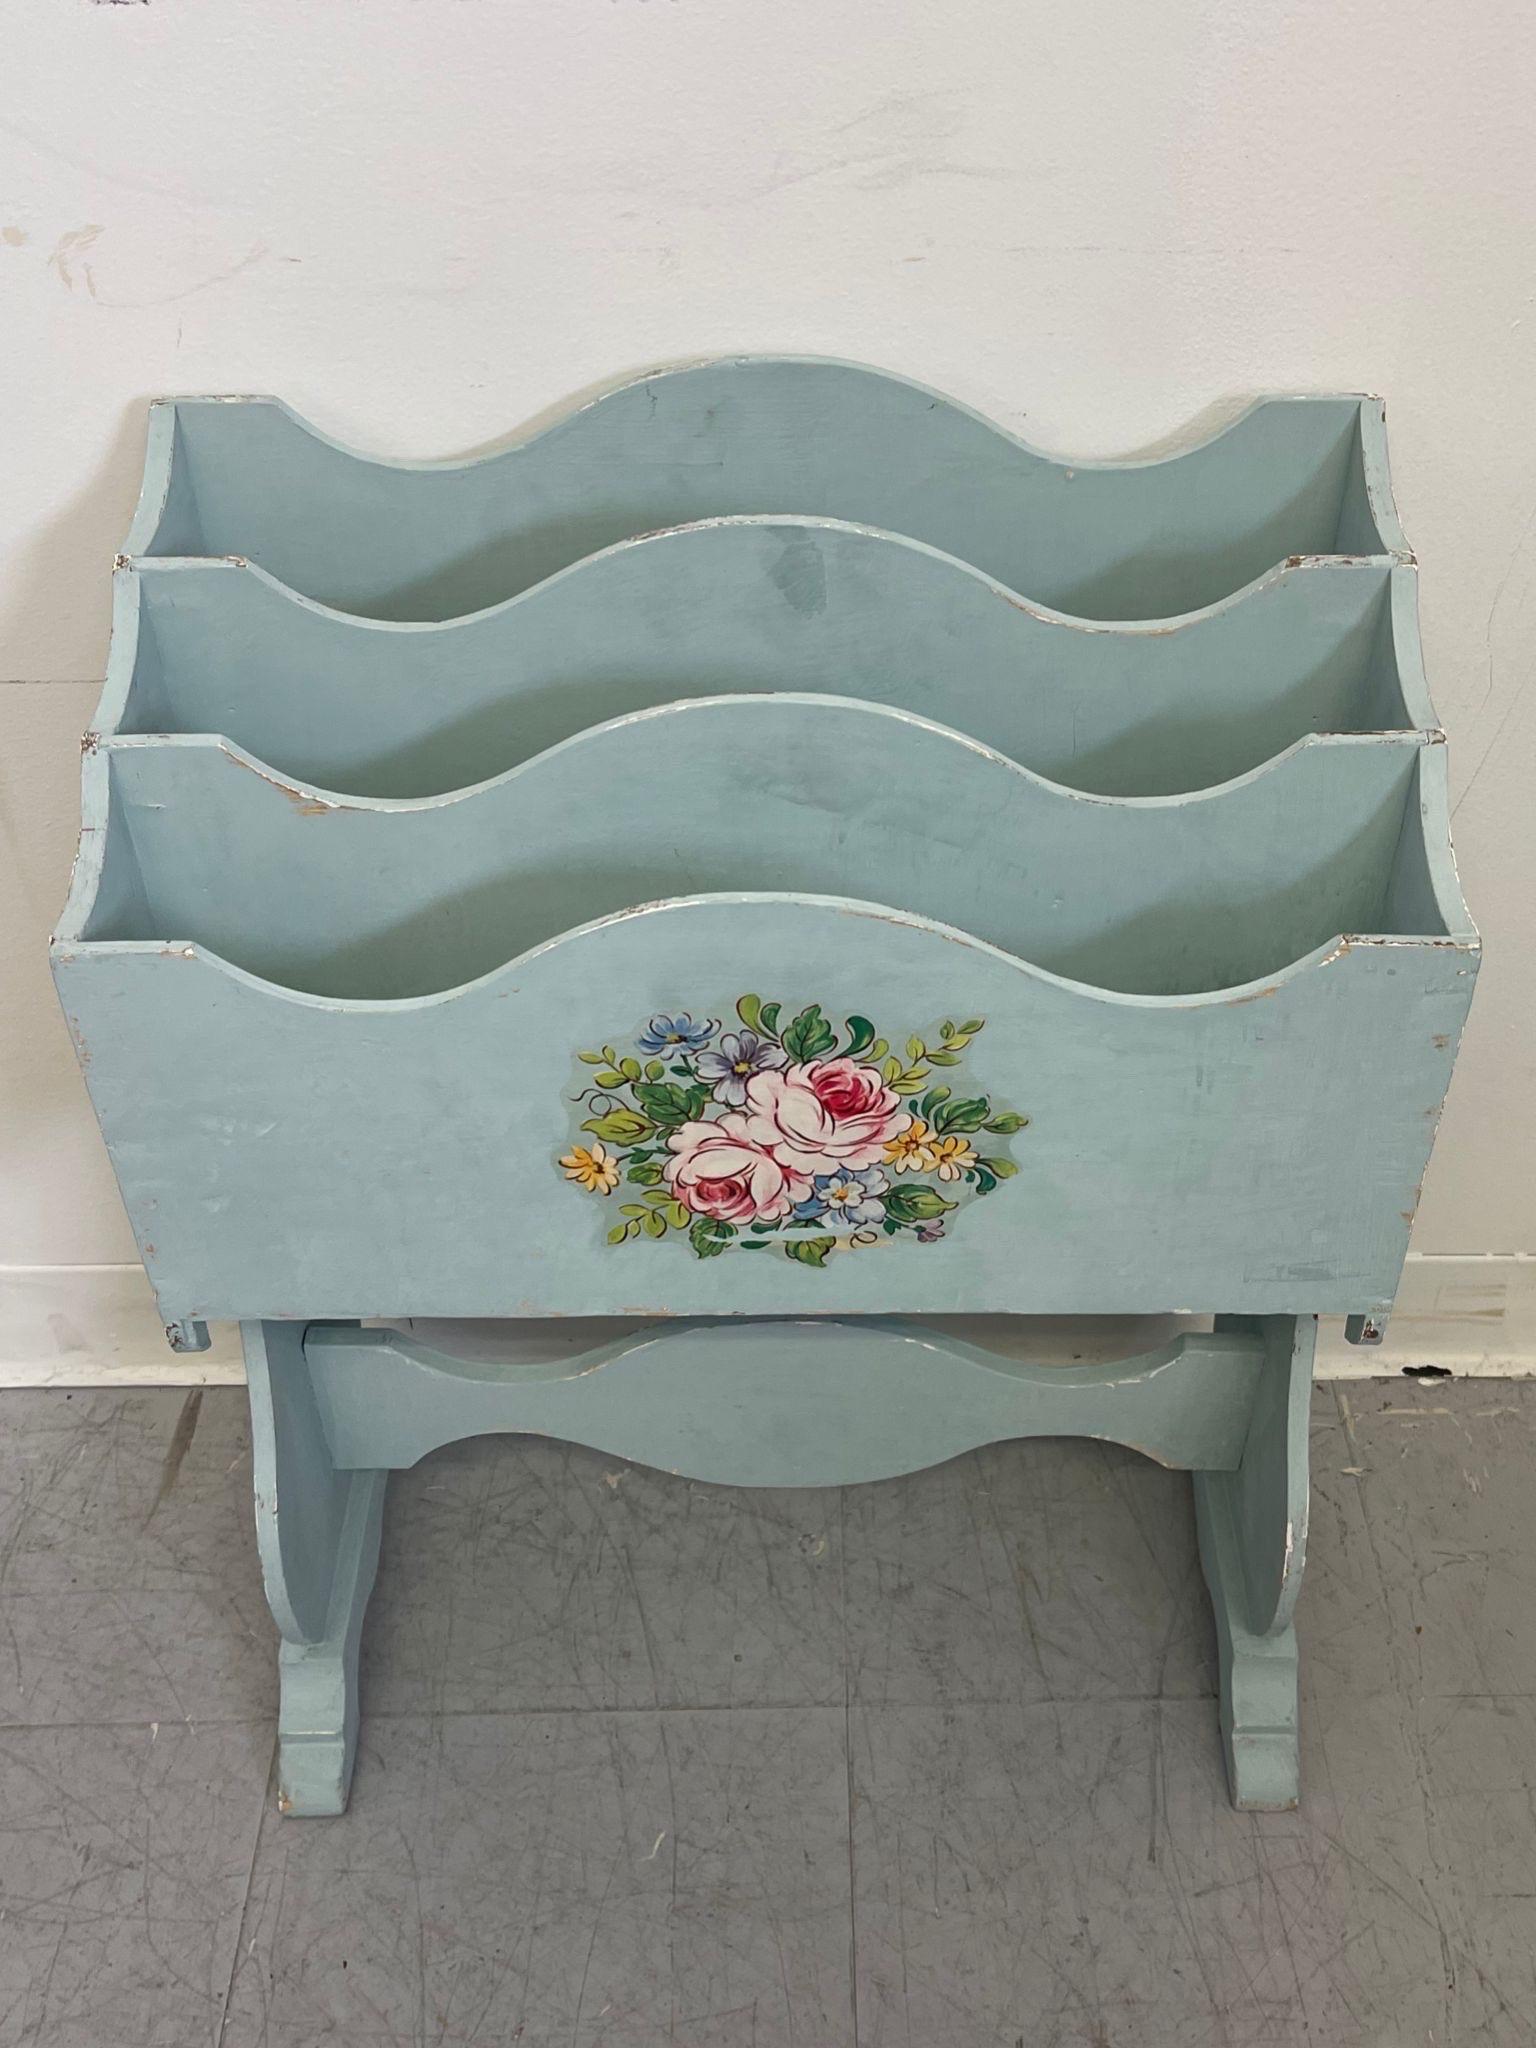 Late 20th Century Vintage Wooden Magazine Rack With Floral Motif. For Sale